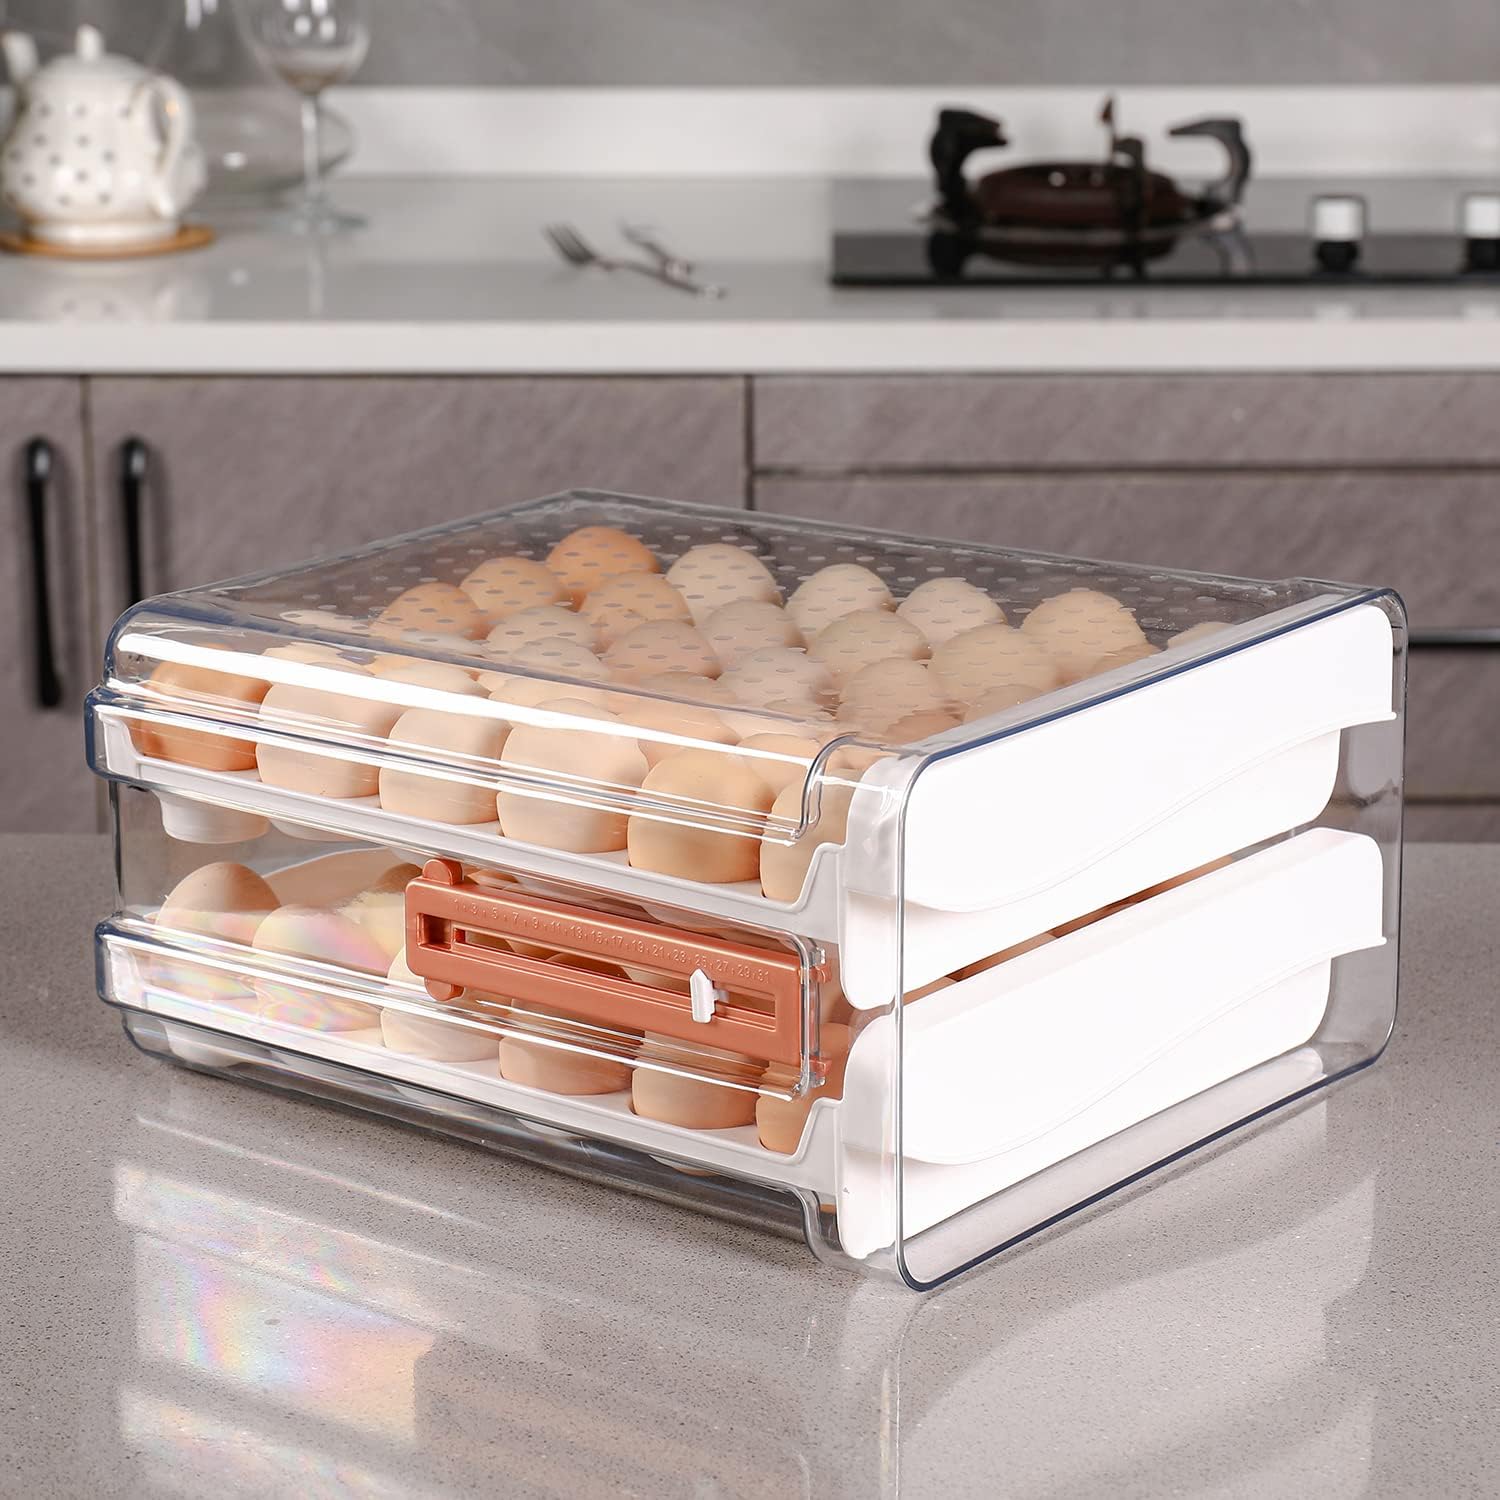 Sooyee 40 Capacity Egg Container for Refrigerator, Household Egg Holder for Fridge, Transparent 2 Drawers Chicken Egg Storage Container,White